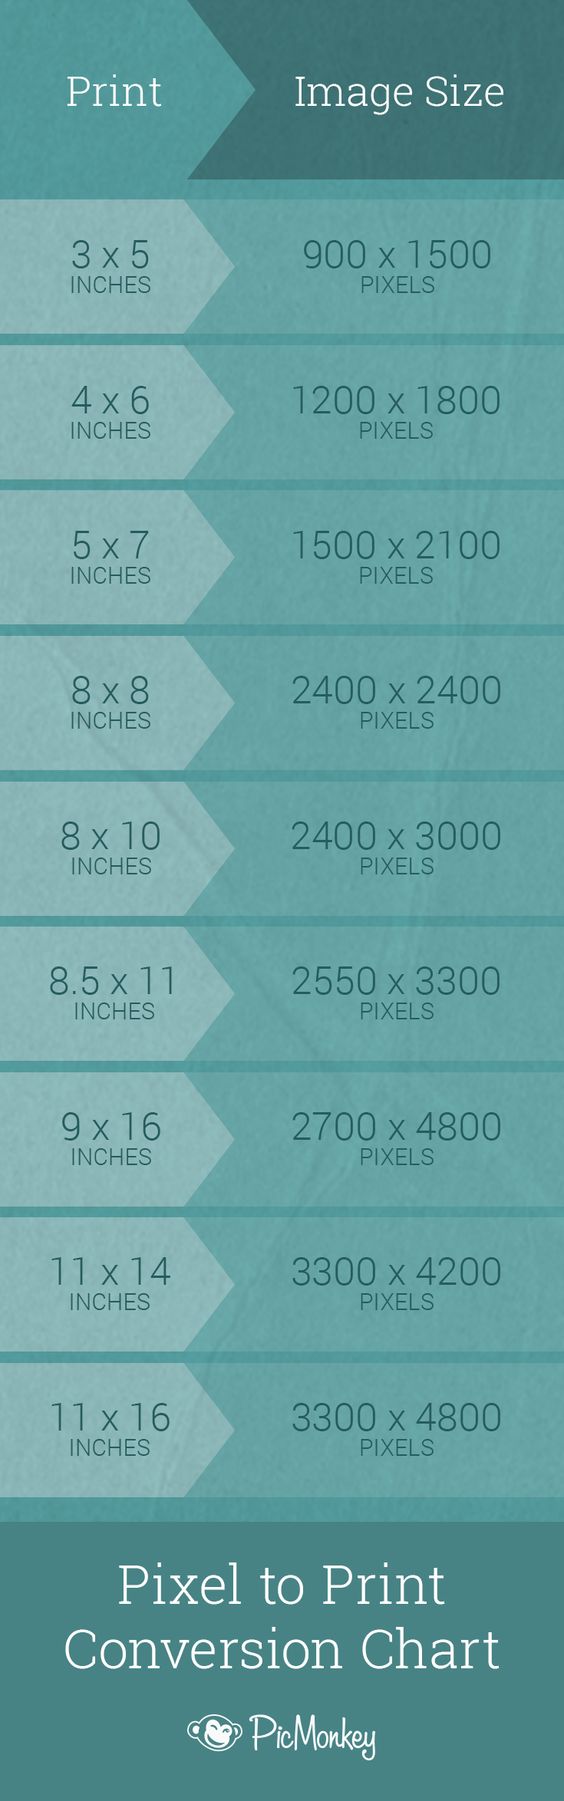 Trying to convert those ethereal pixels into cold, hard, printable inches? Look no further. Here are the conversions we recommend for the following common photo sizes.